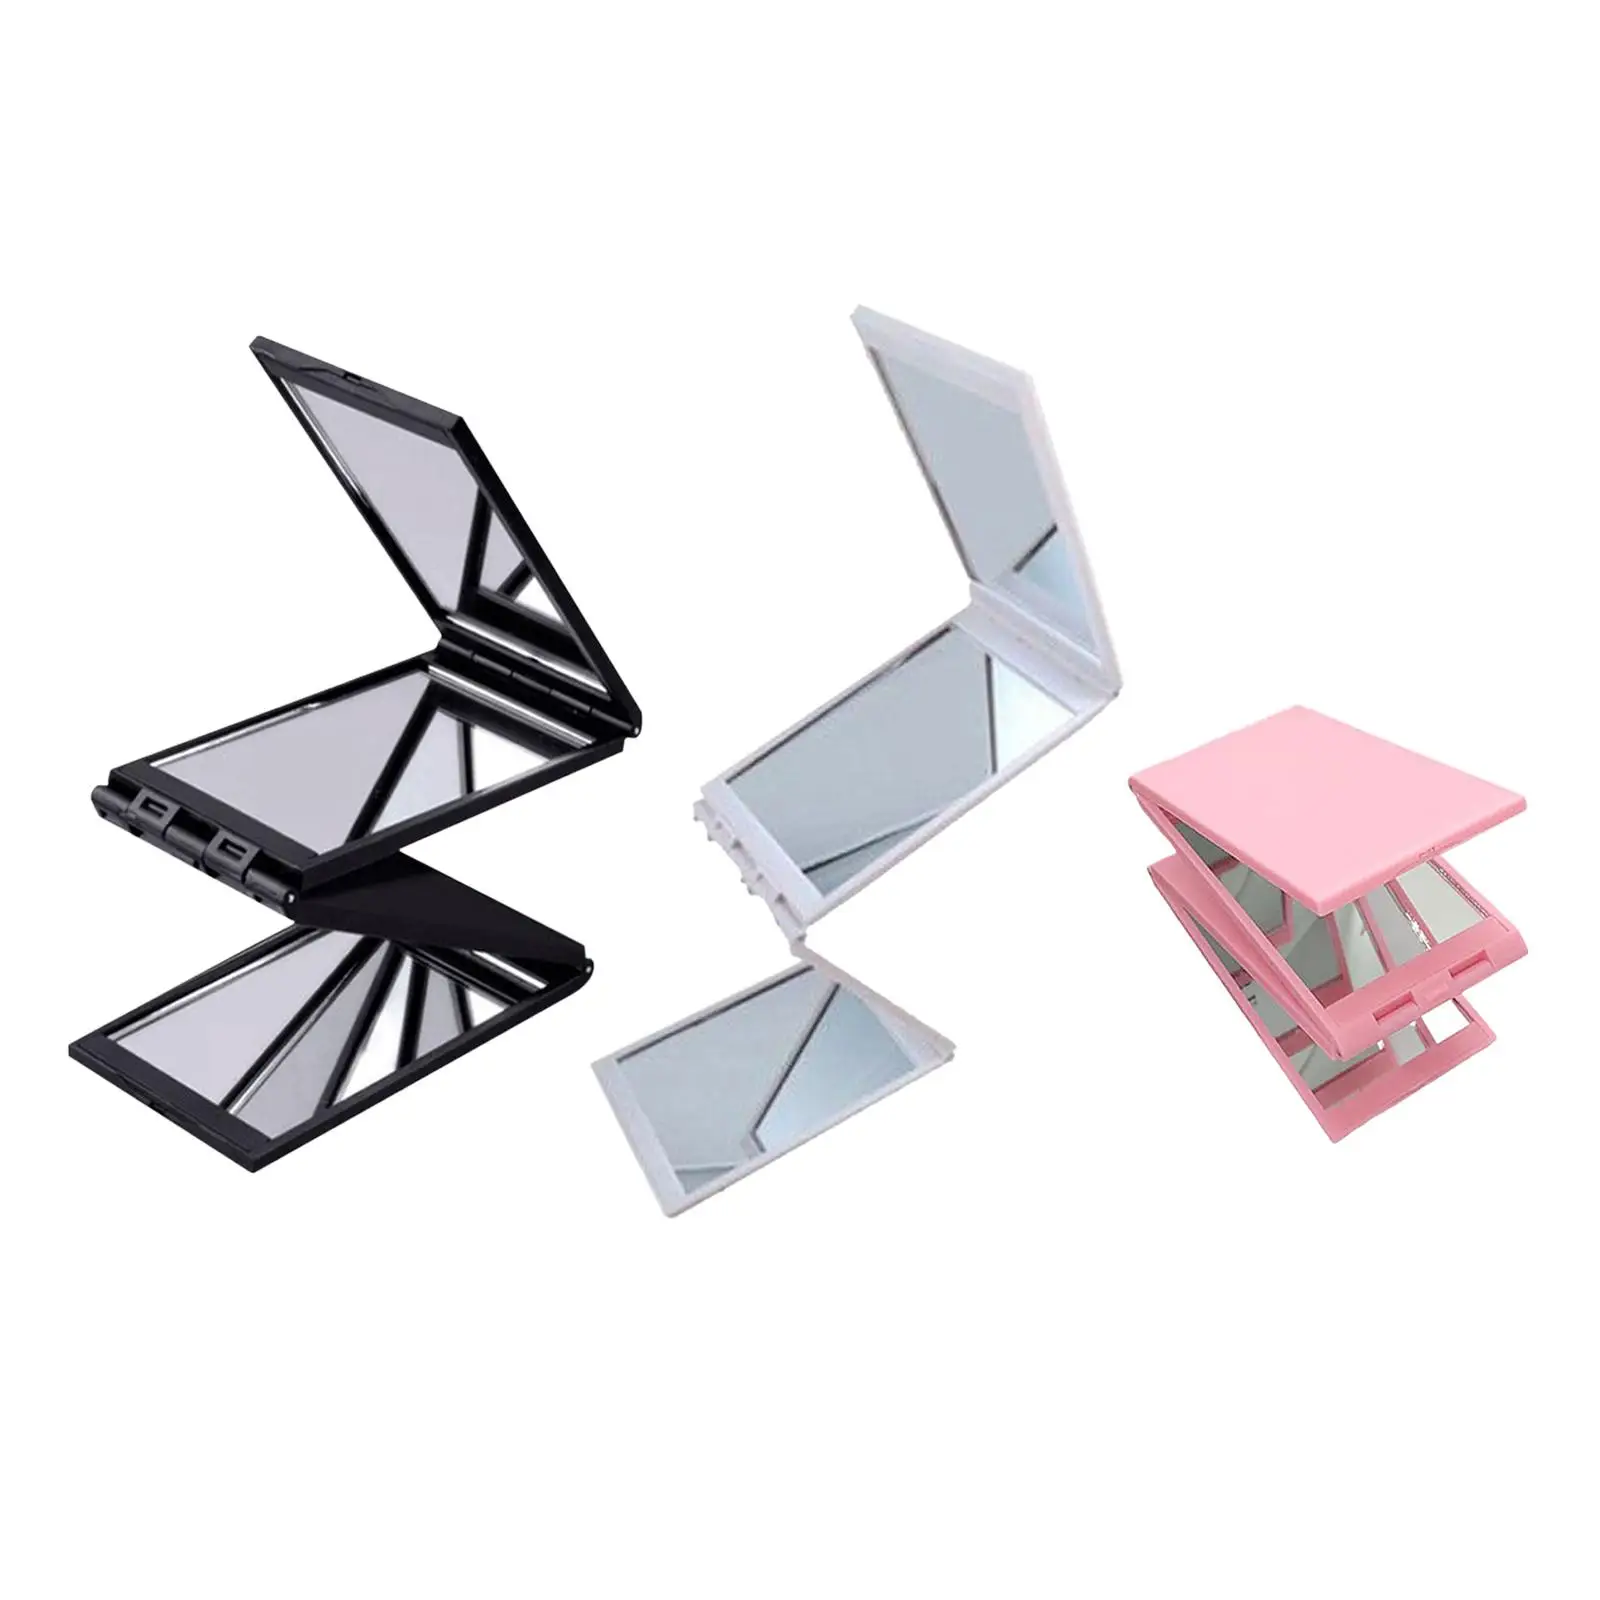 4 Sided Cosmetic Vanity Mirror Adjustable Durable Rectangle for Home Dorm